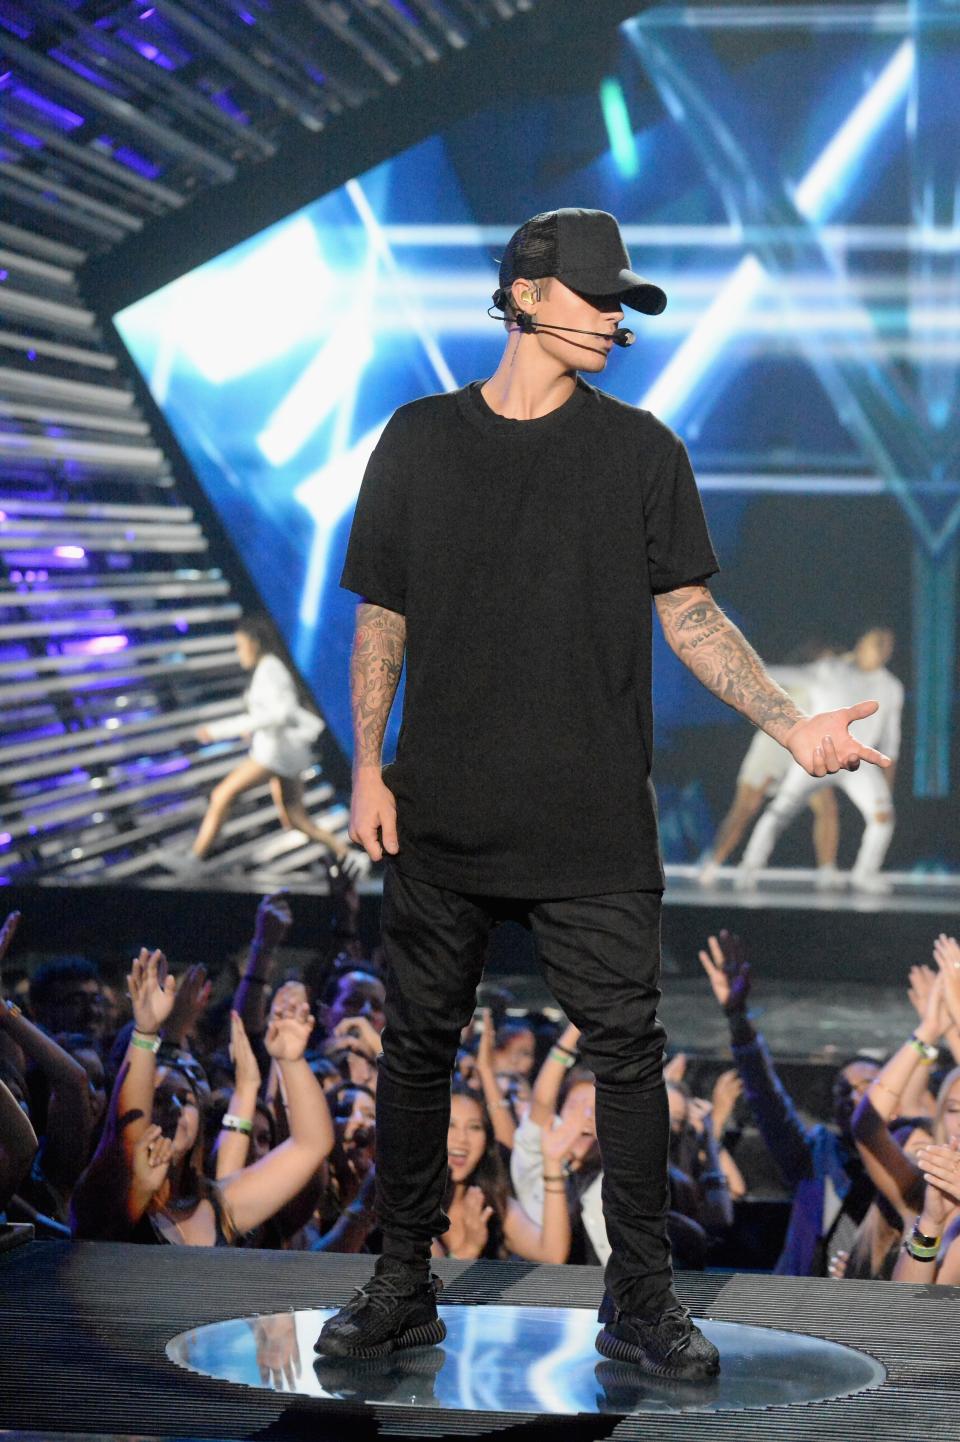 Justin Bieber performs on stage, wearing a dark t-shirt and pants, with fans reaching towards him